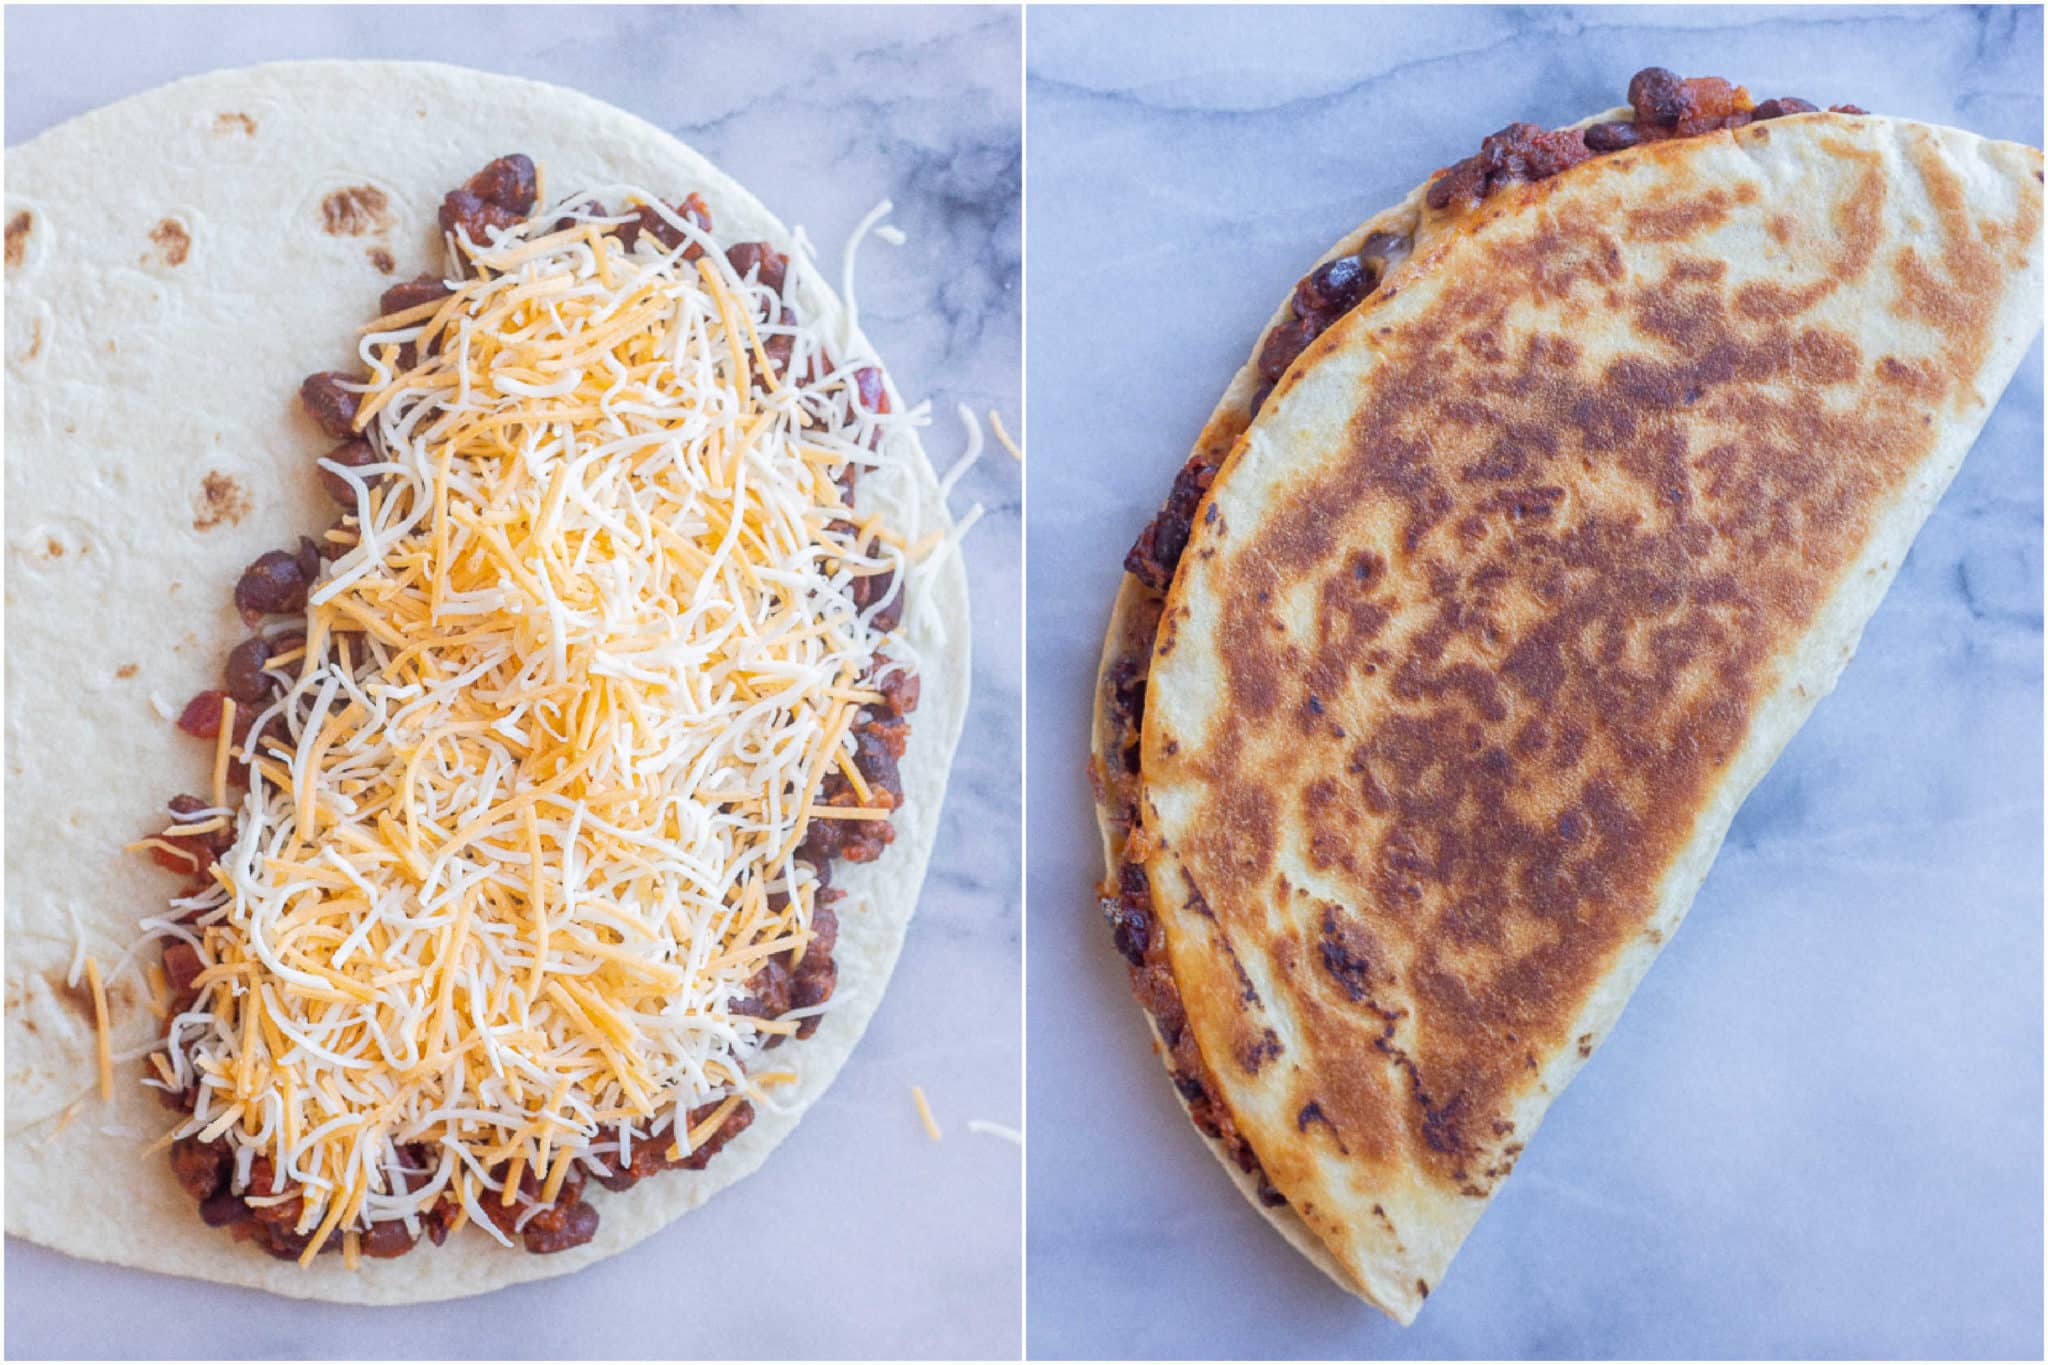 bbq black beans in a tortilla with cheese melted and a cooked quesadilla